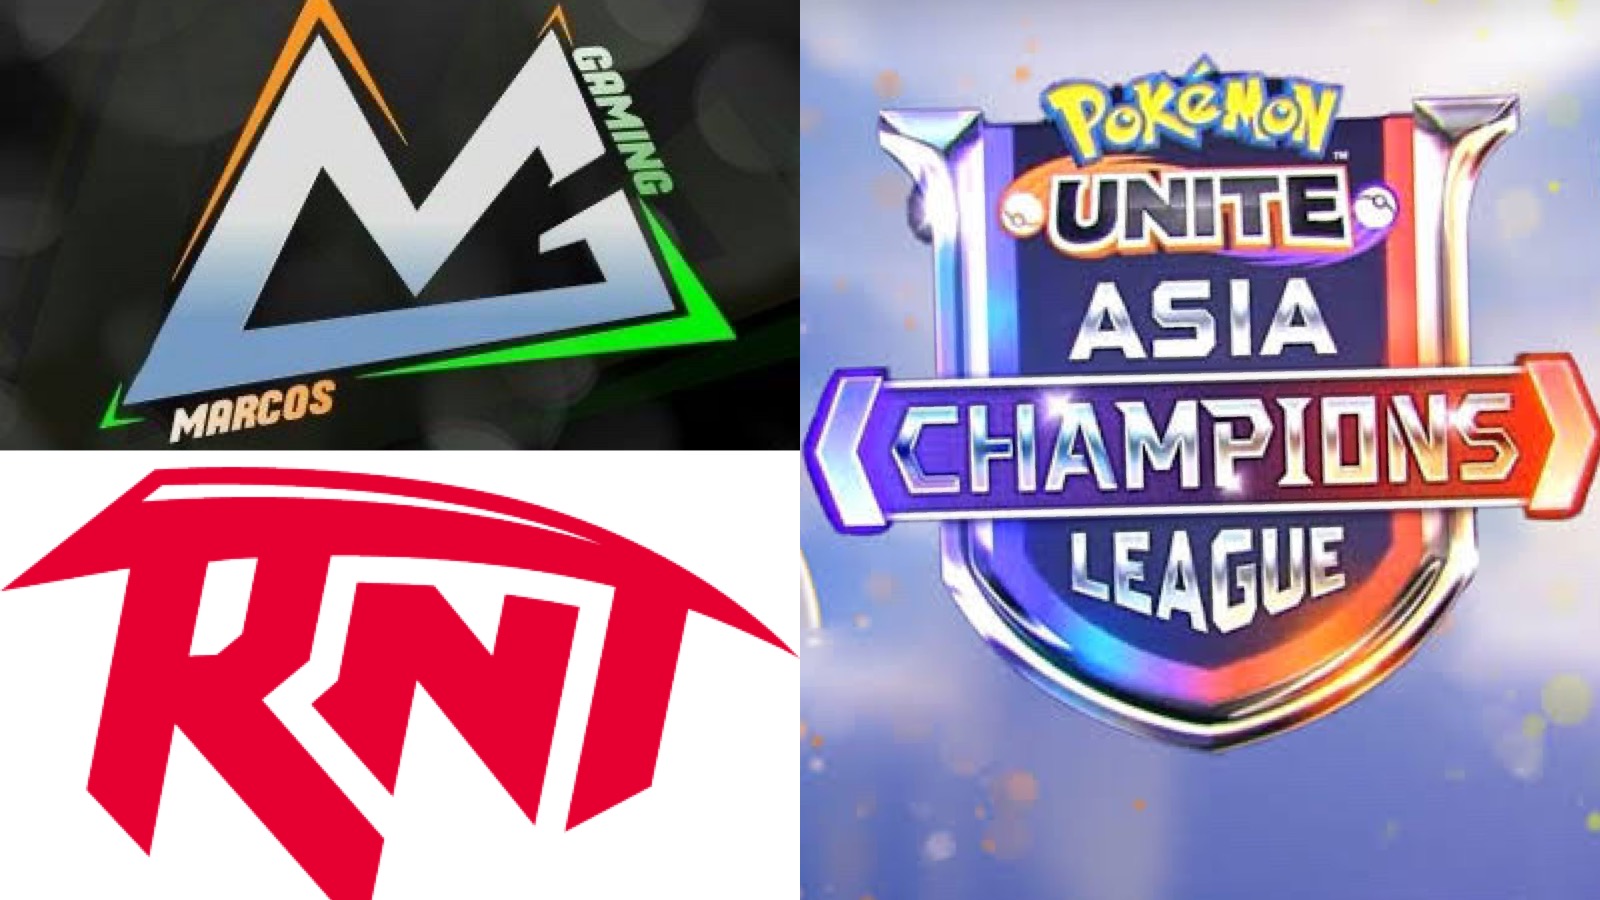 Revenant Esports and Marcos Gaming Set to Represent India at the Pokemon UNITE Asia Champions League Finals in Malaysia